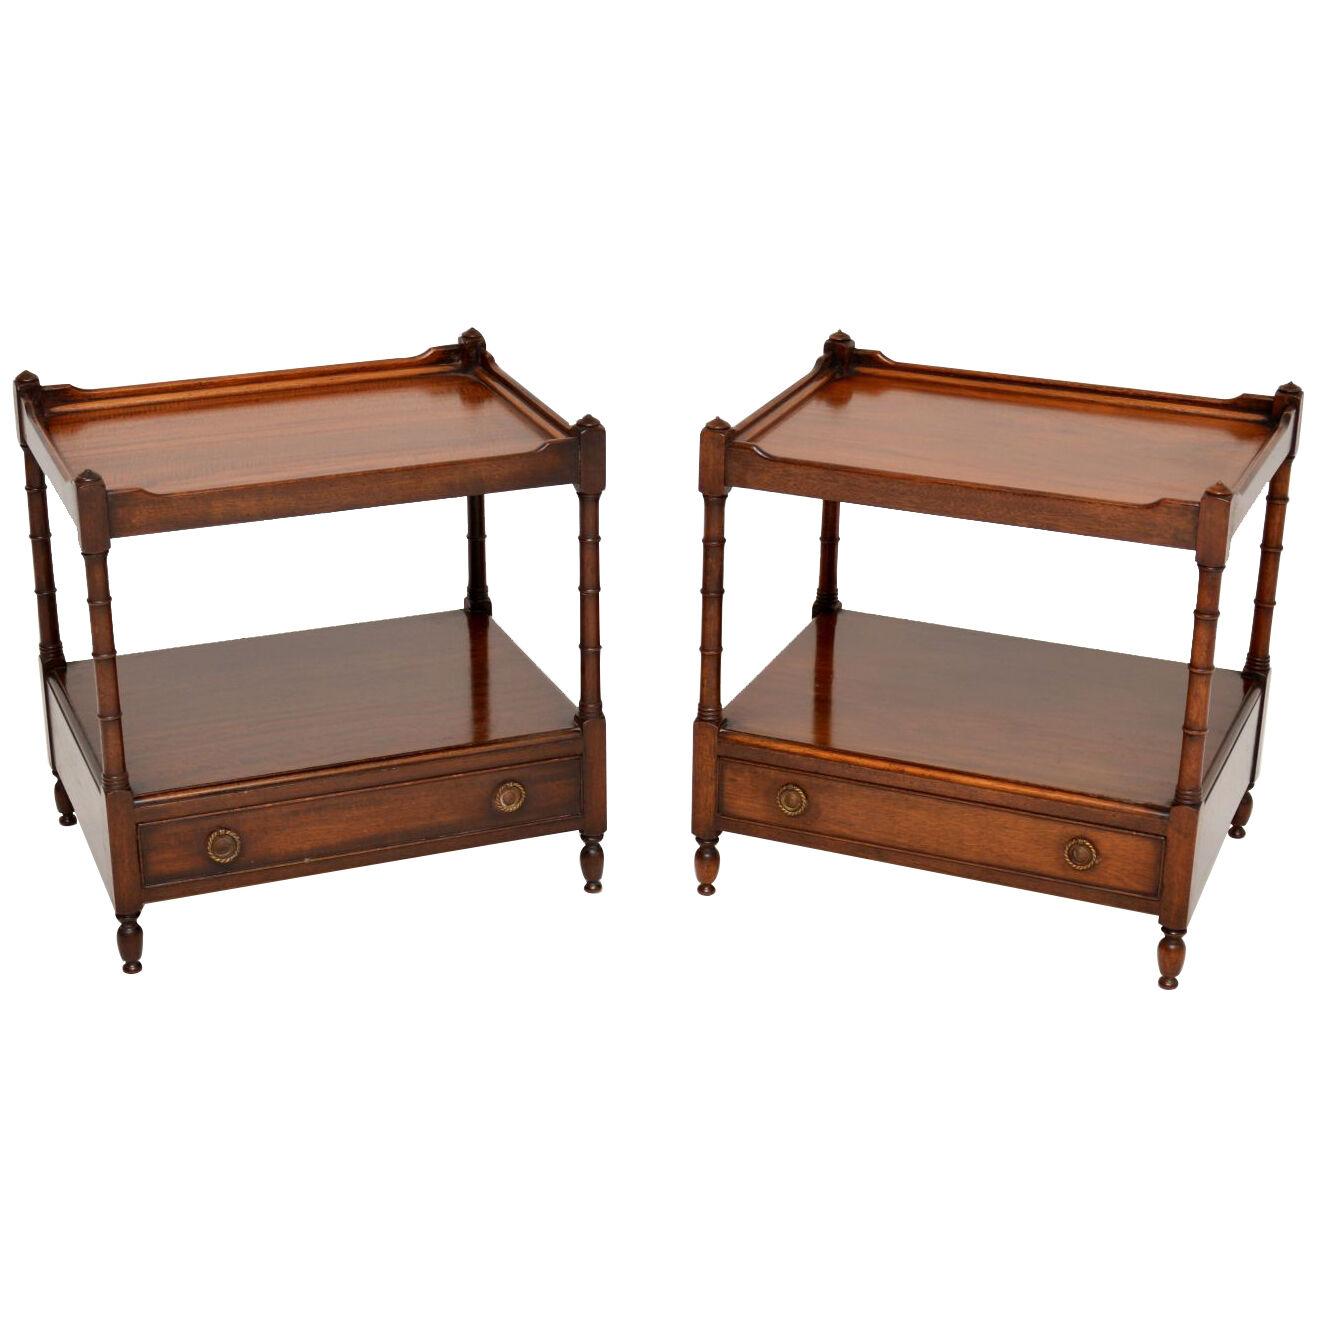 Pair of Antique Mahogany Side Tables